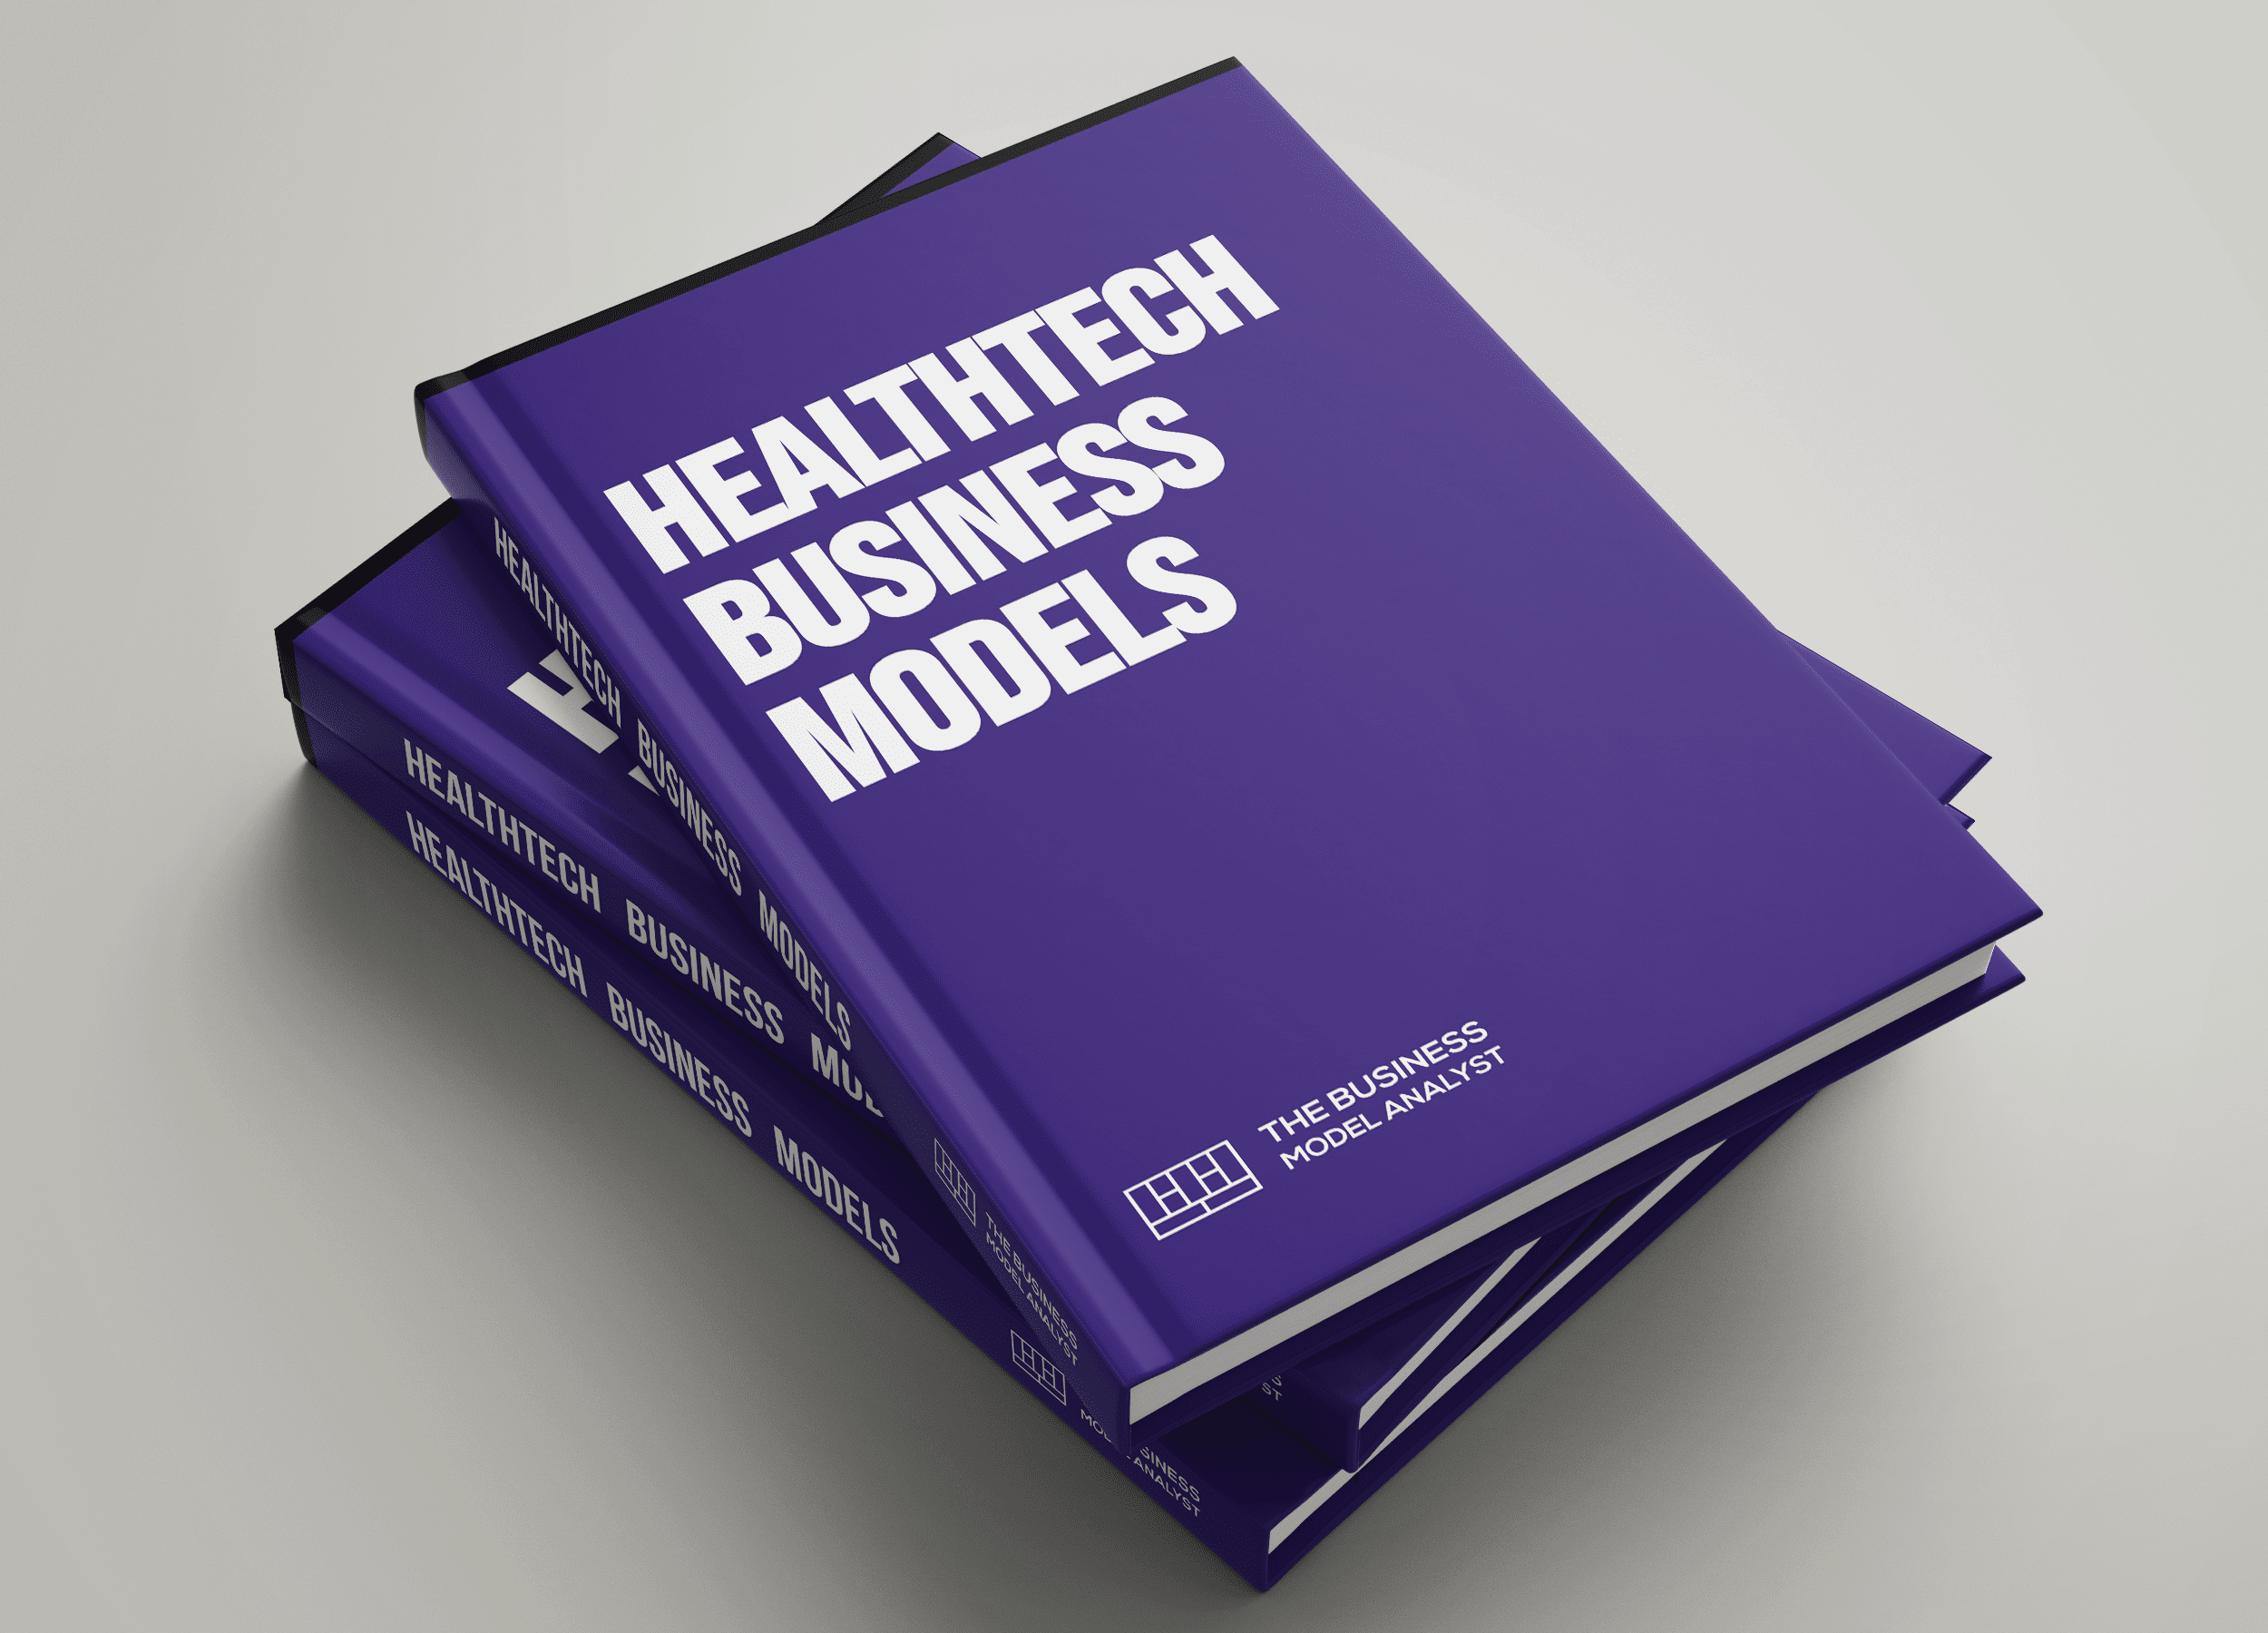 Healthtech business models covers 2